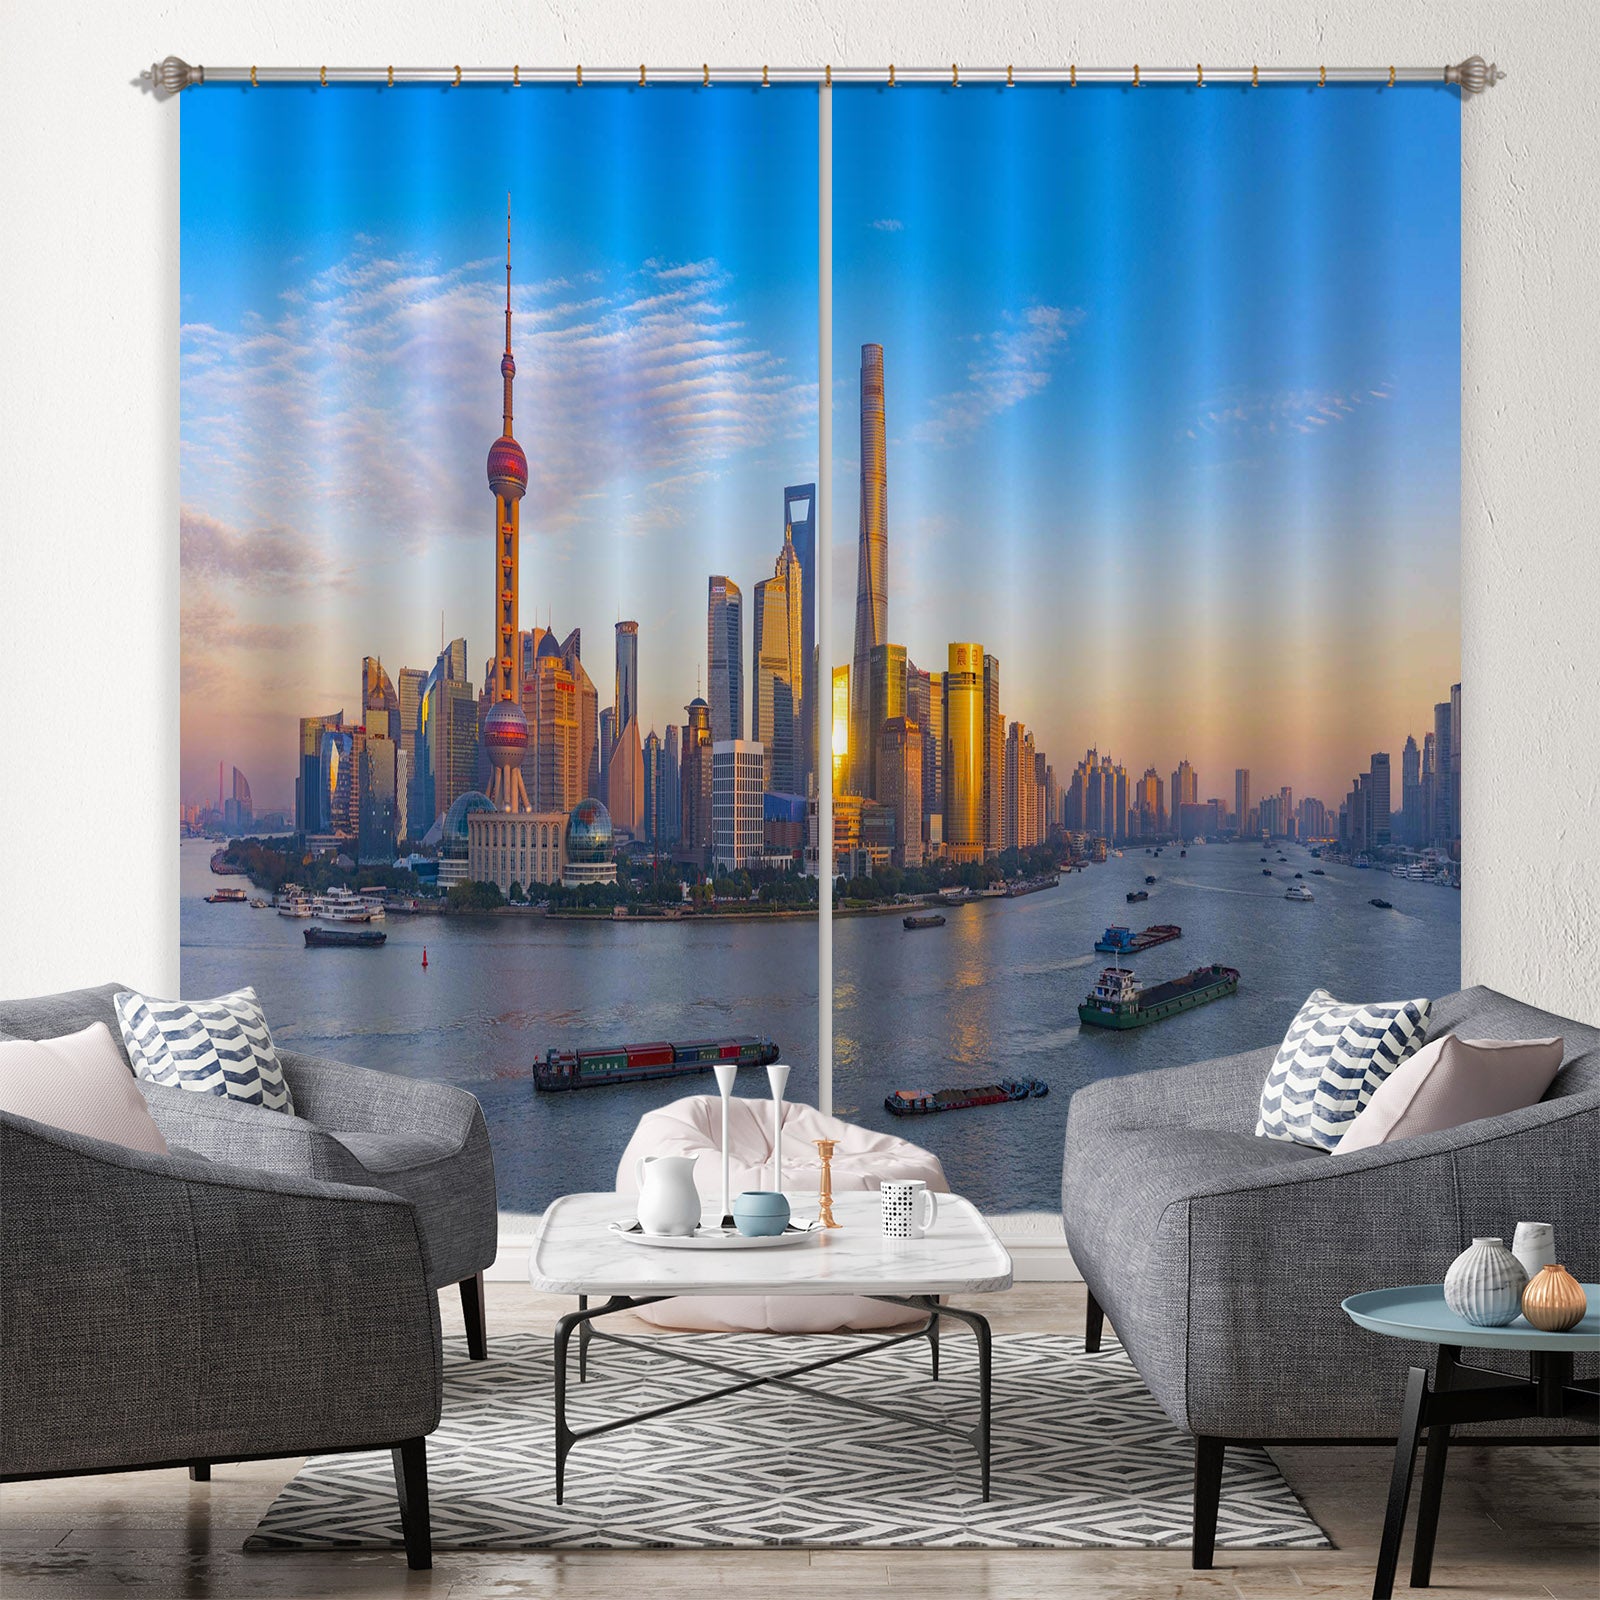 3D Water City 198 Marco Carmassi Curtain Curtains Drapes